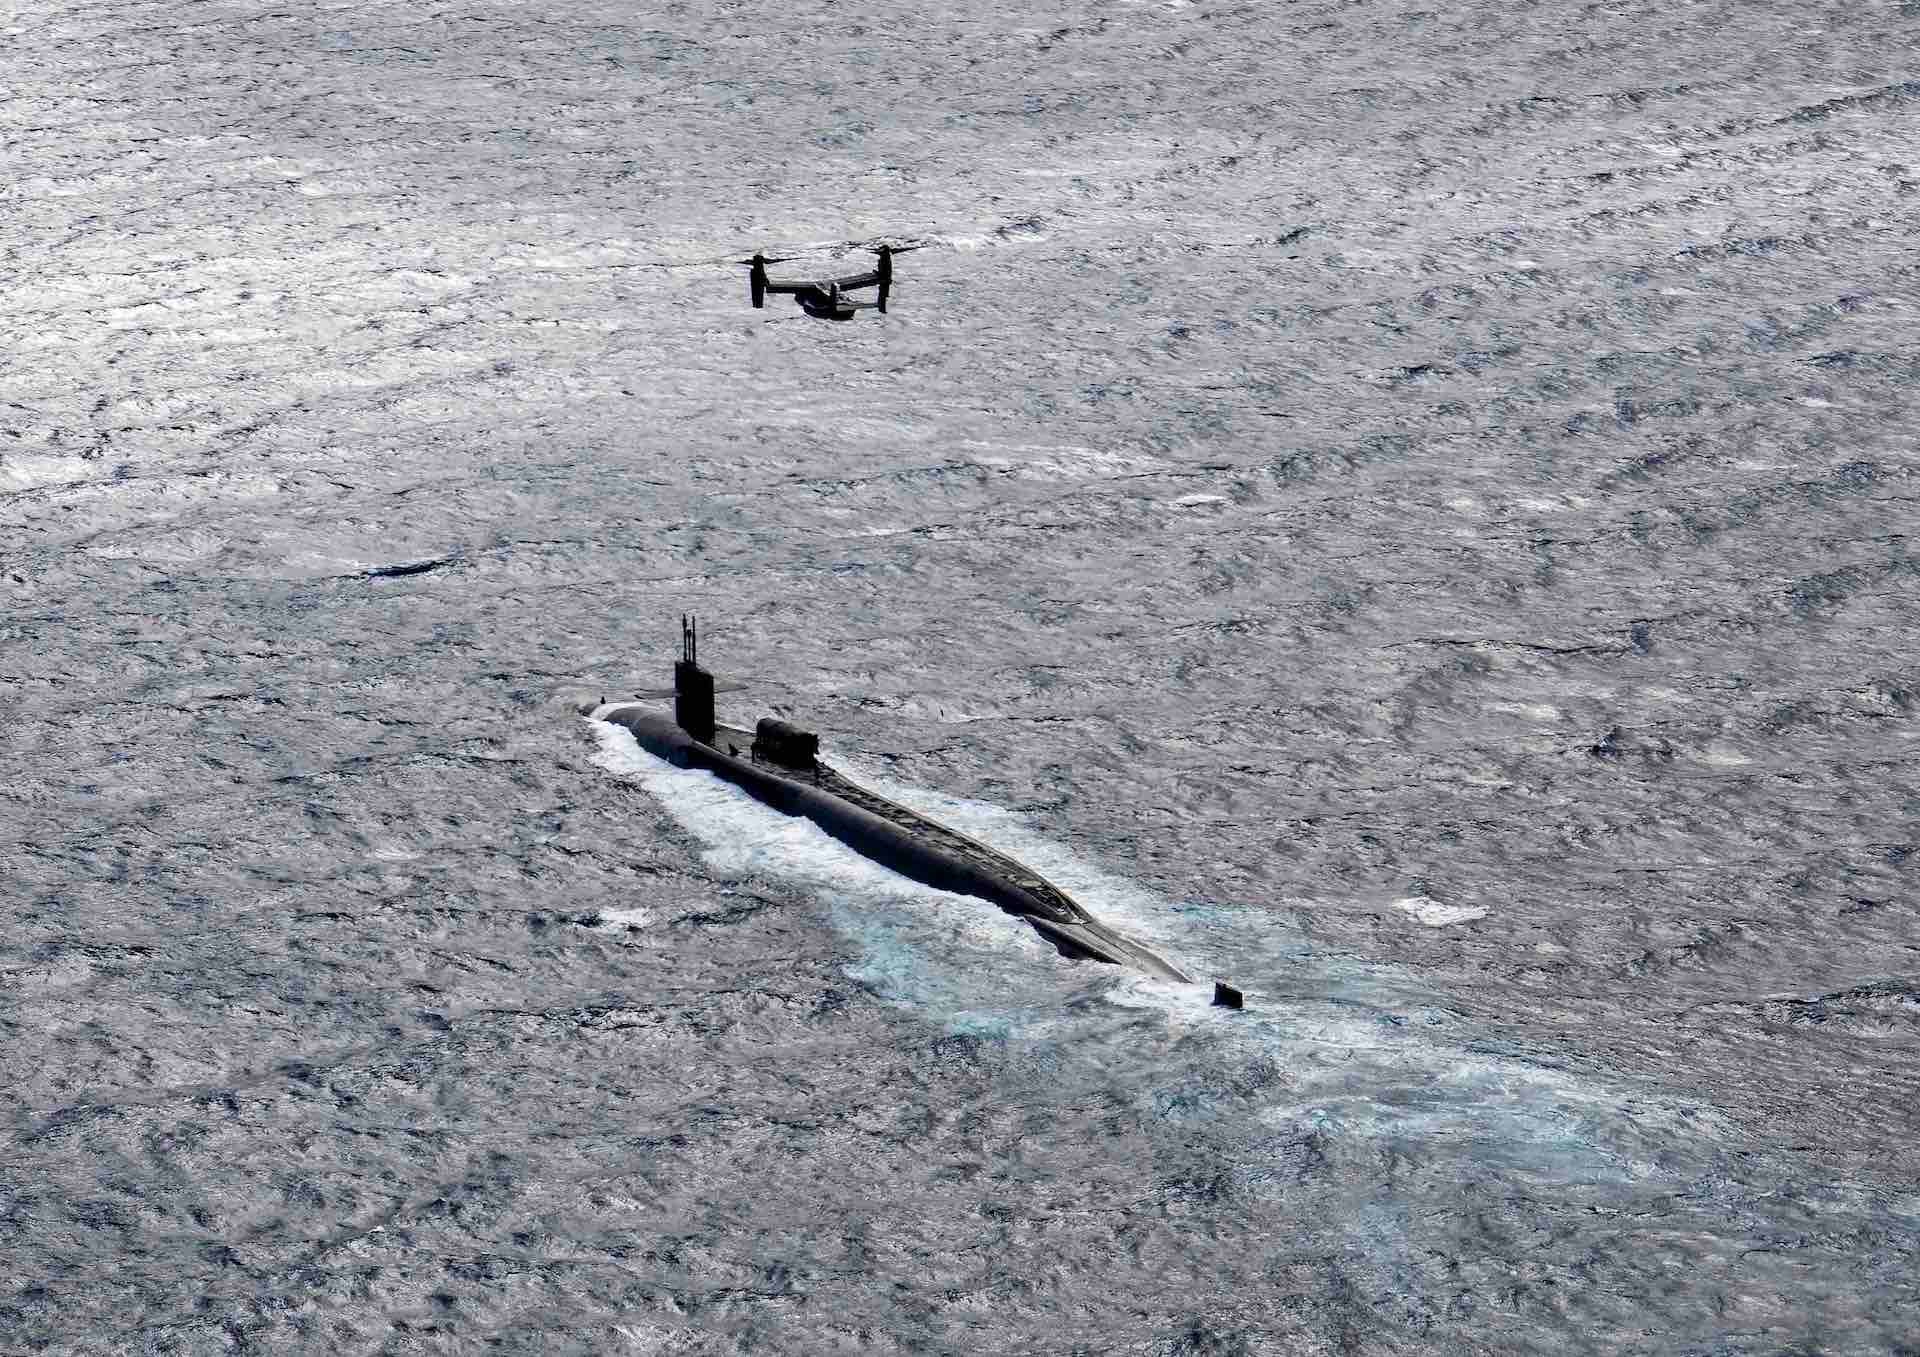 MEDITERRANEAN SEA (Feb. 26, 2023) Ohio-class guided-missile submarine USS Florida (SSGN 728) and a CV-22 Osprey, assigned to 7th Special Operations Squadron, 352nd Special Operations Wing, participate in a special operations forces interoperability exercise, Feb. 26, 2023. These  operations demonstrate U.S. European Command’s ability to rapidly deploy Special Operations Forces throughout the theater at a time and place of our choosing, and the U.S. commitment to train with Allies and partners to deploy and fight as multinational forces and SOF to meet today’s challenges. (U.S. Air Force photo by Tech Sgt. Westin Warburton)